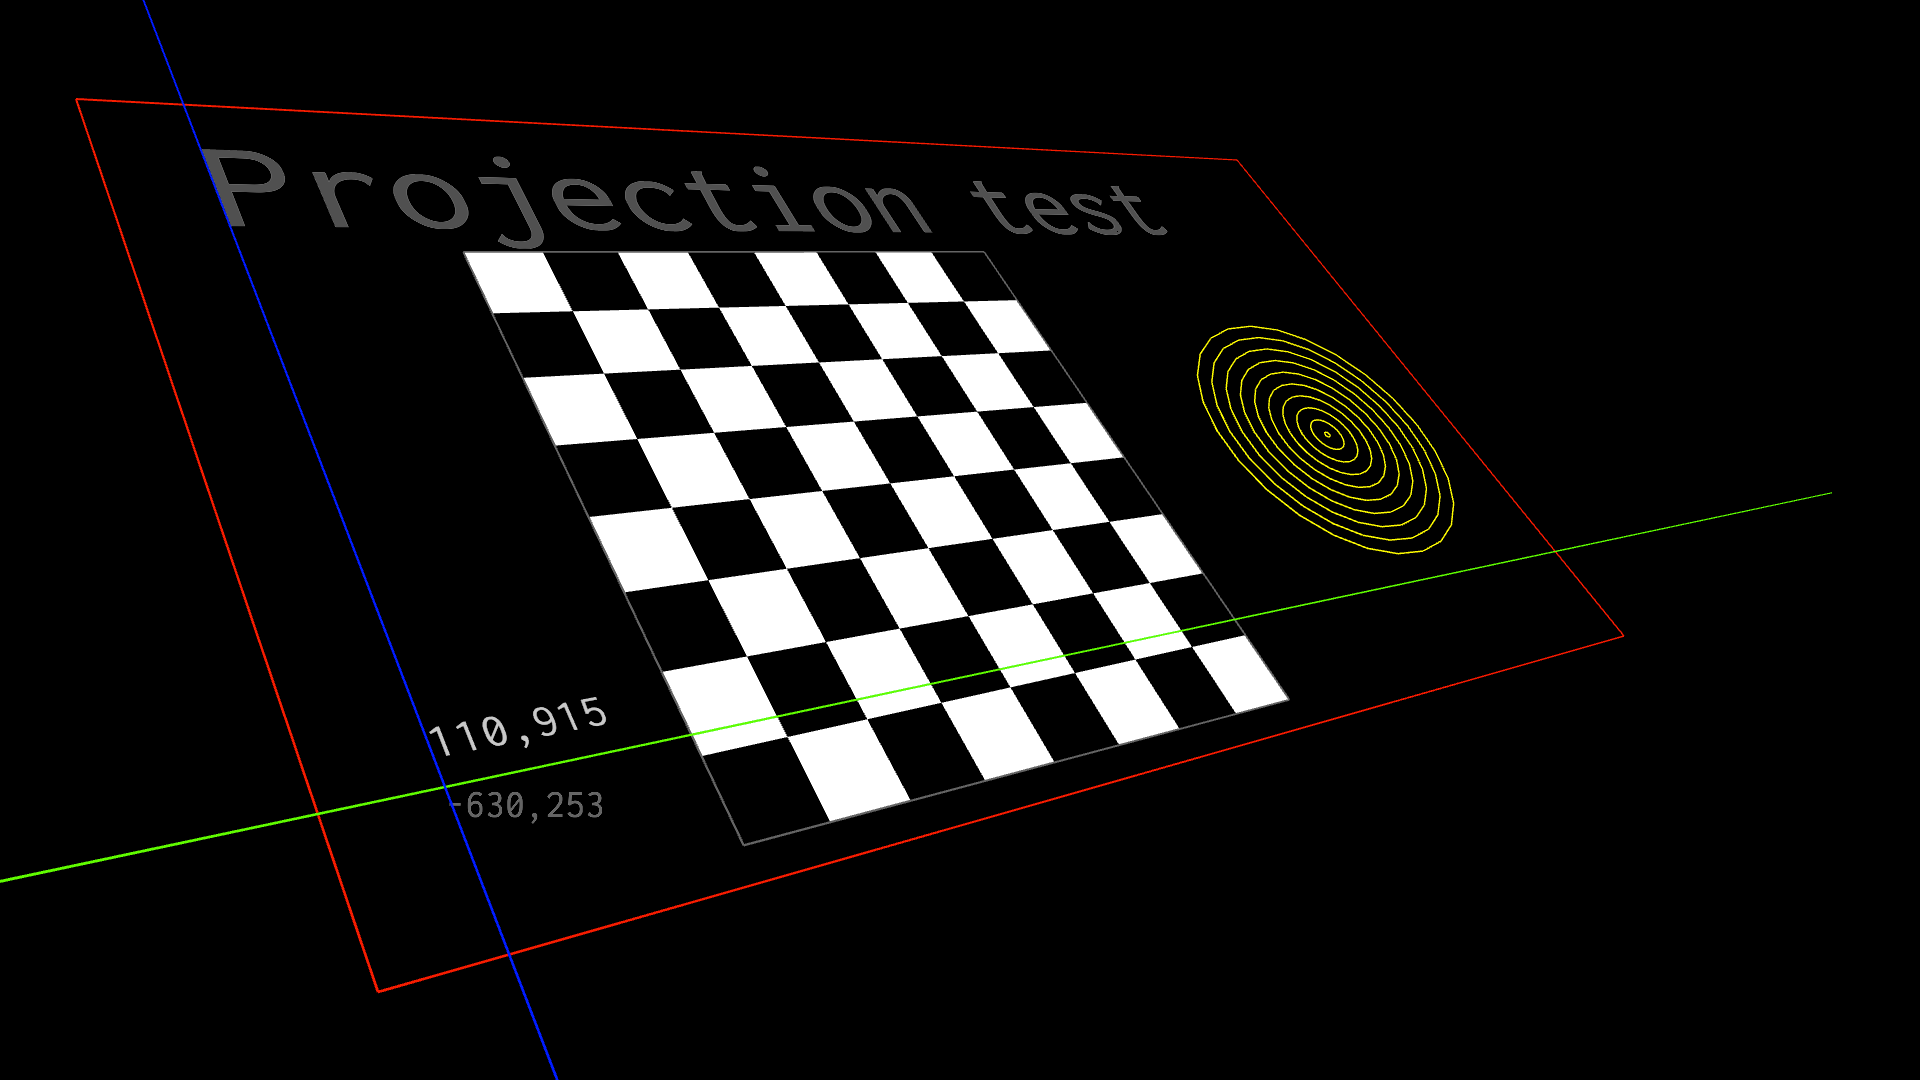 Chessboard skewed by the perspective transform